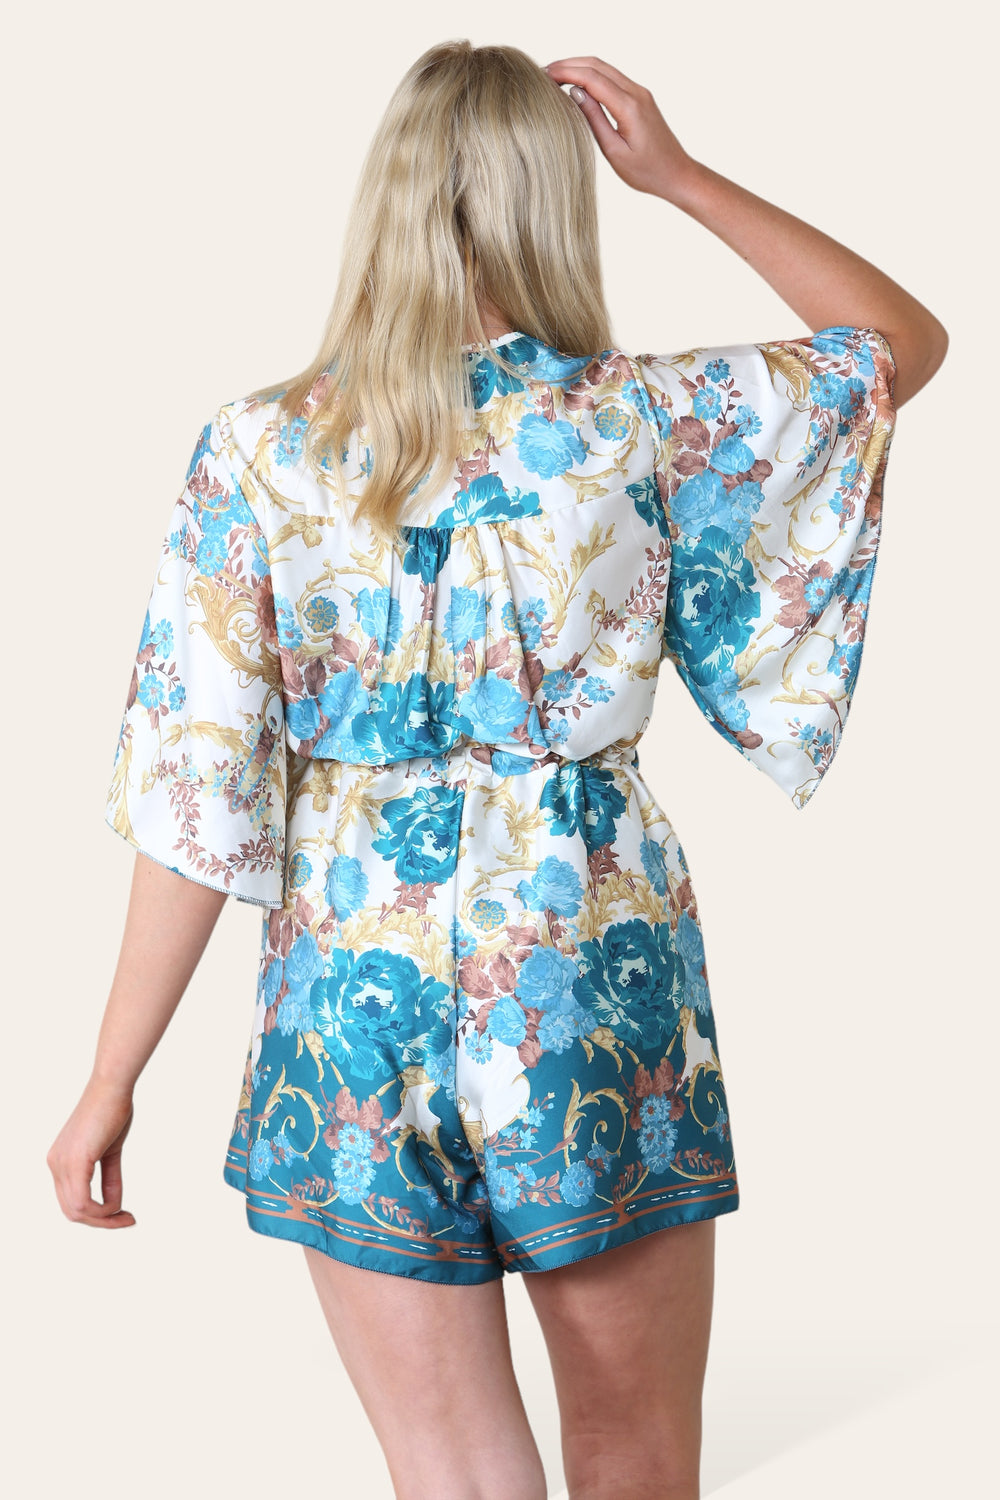 BUTTON DETAIL PRINTED PLAYSUIT (8531070484728)